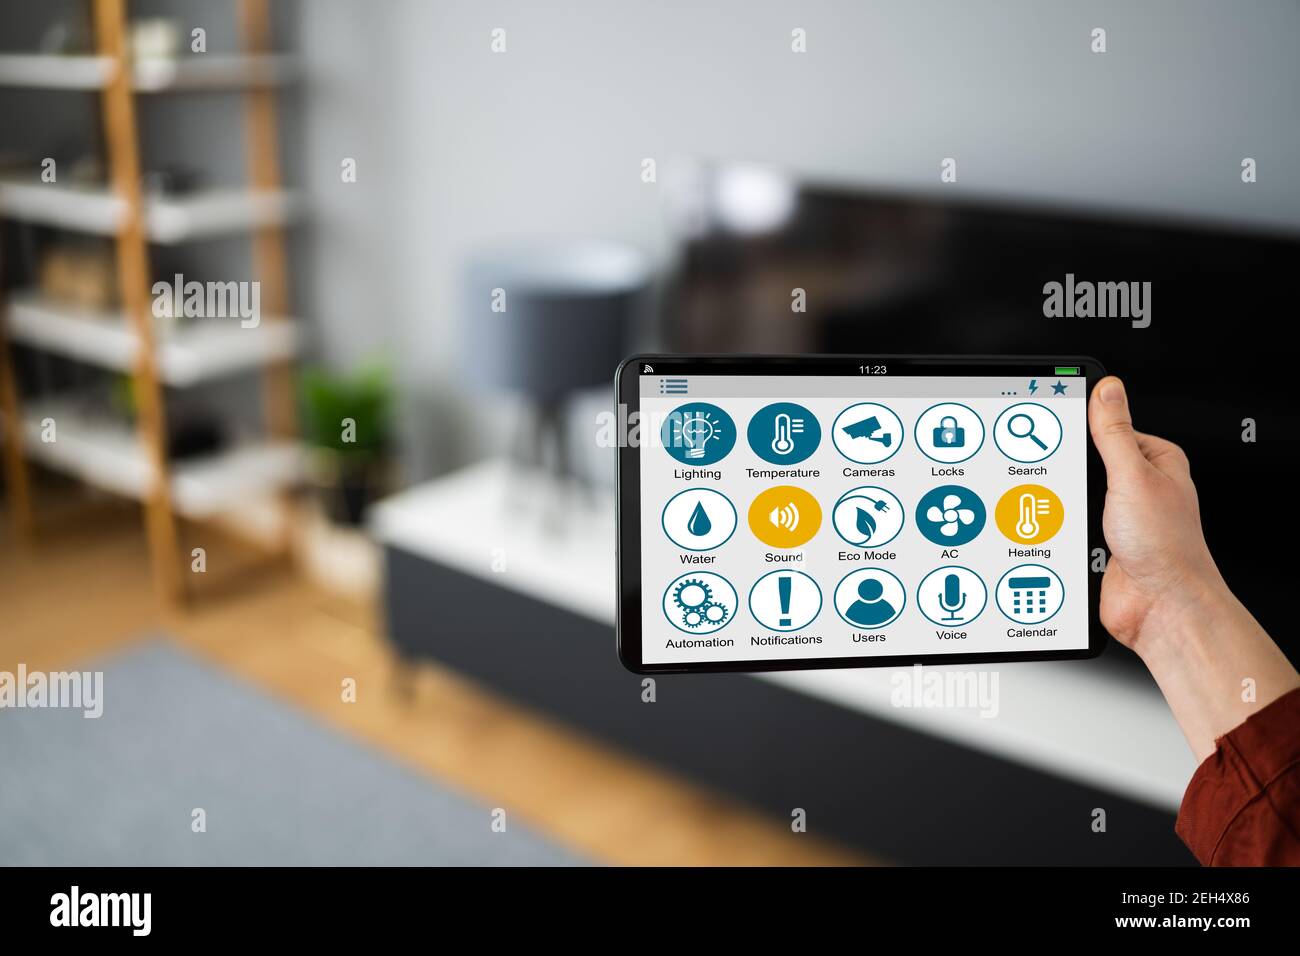 https://c8.alamy.com/comp/2EH4X86/using-house-automation-technology-and-iot-tech-gadgets-2EH4X86.jpg